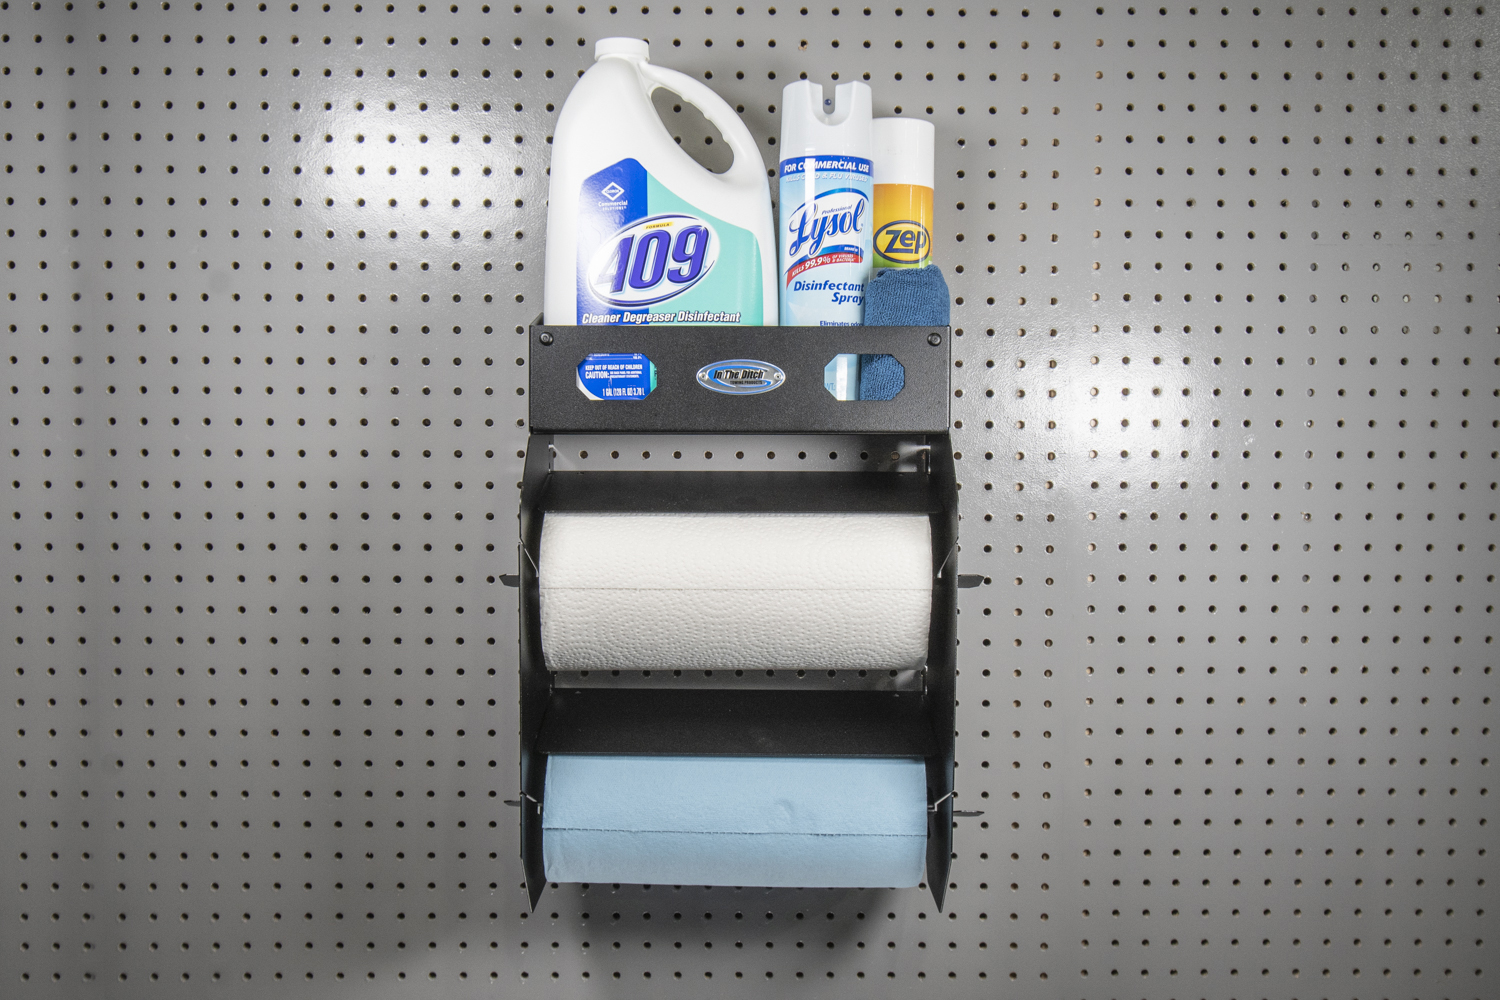 https://intheditch.com/wp-content/uploads/469-In-The-Ditch-Garage-Paper-Towel-Holder-Double-w-Shelf-ITD1765.jpg